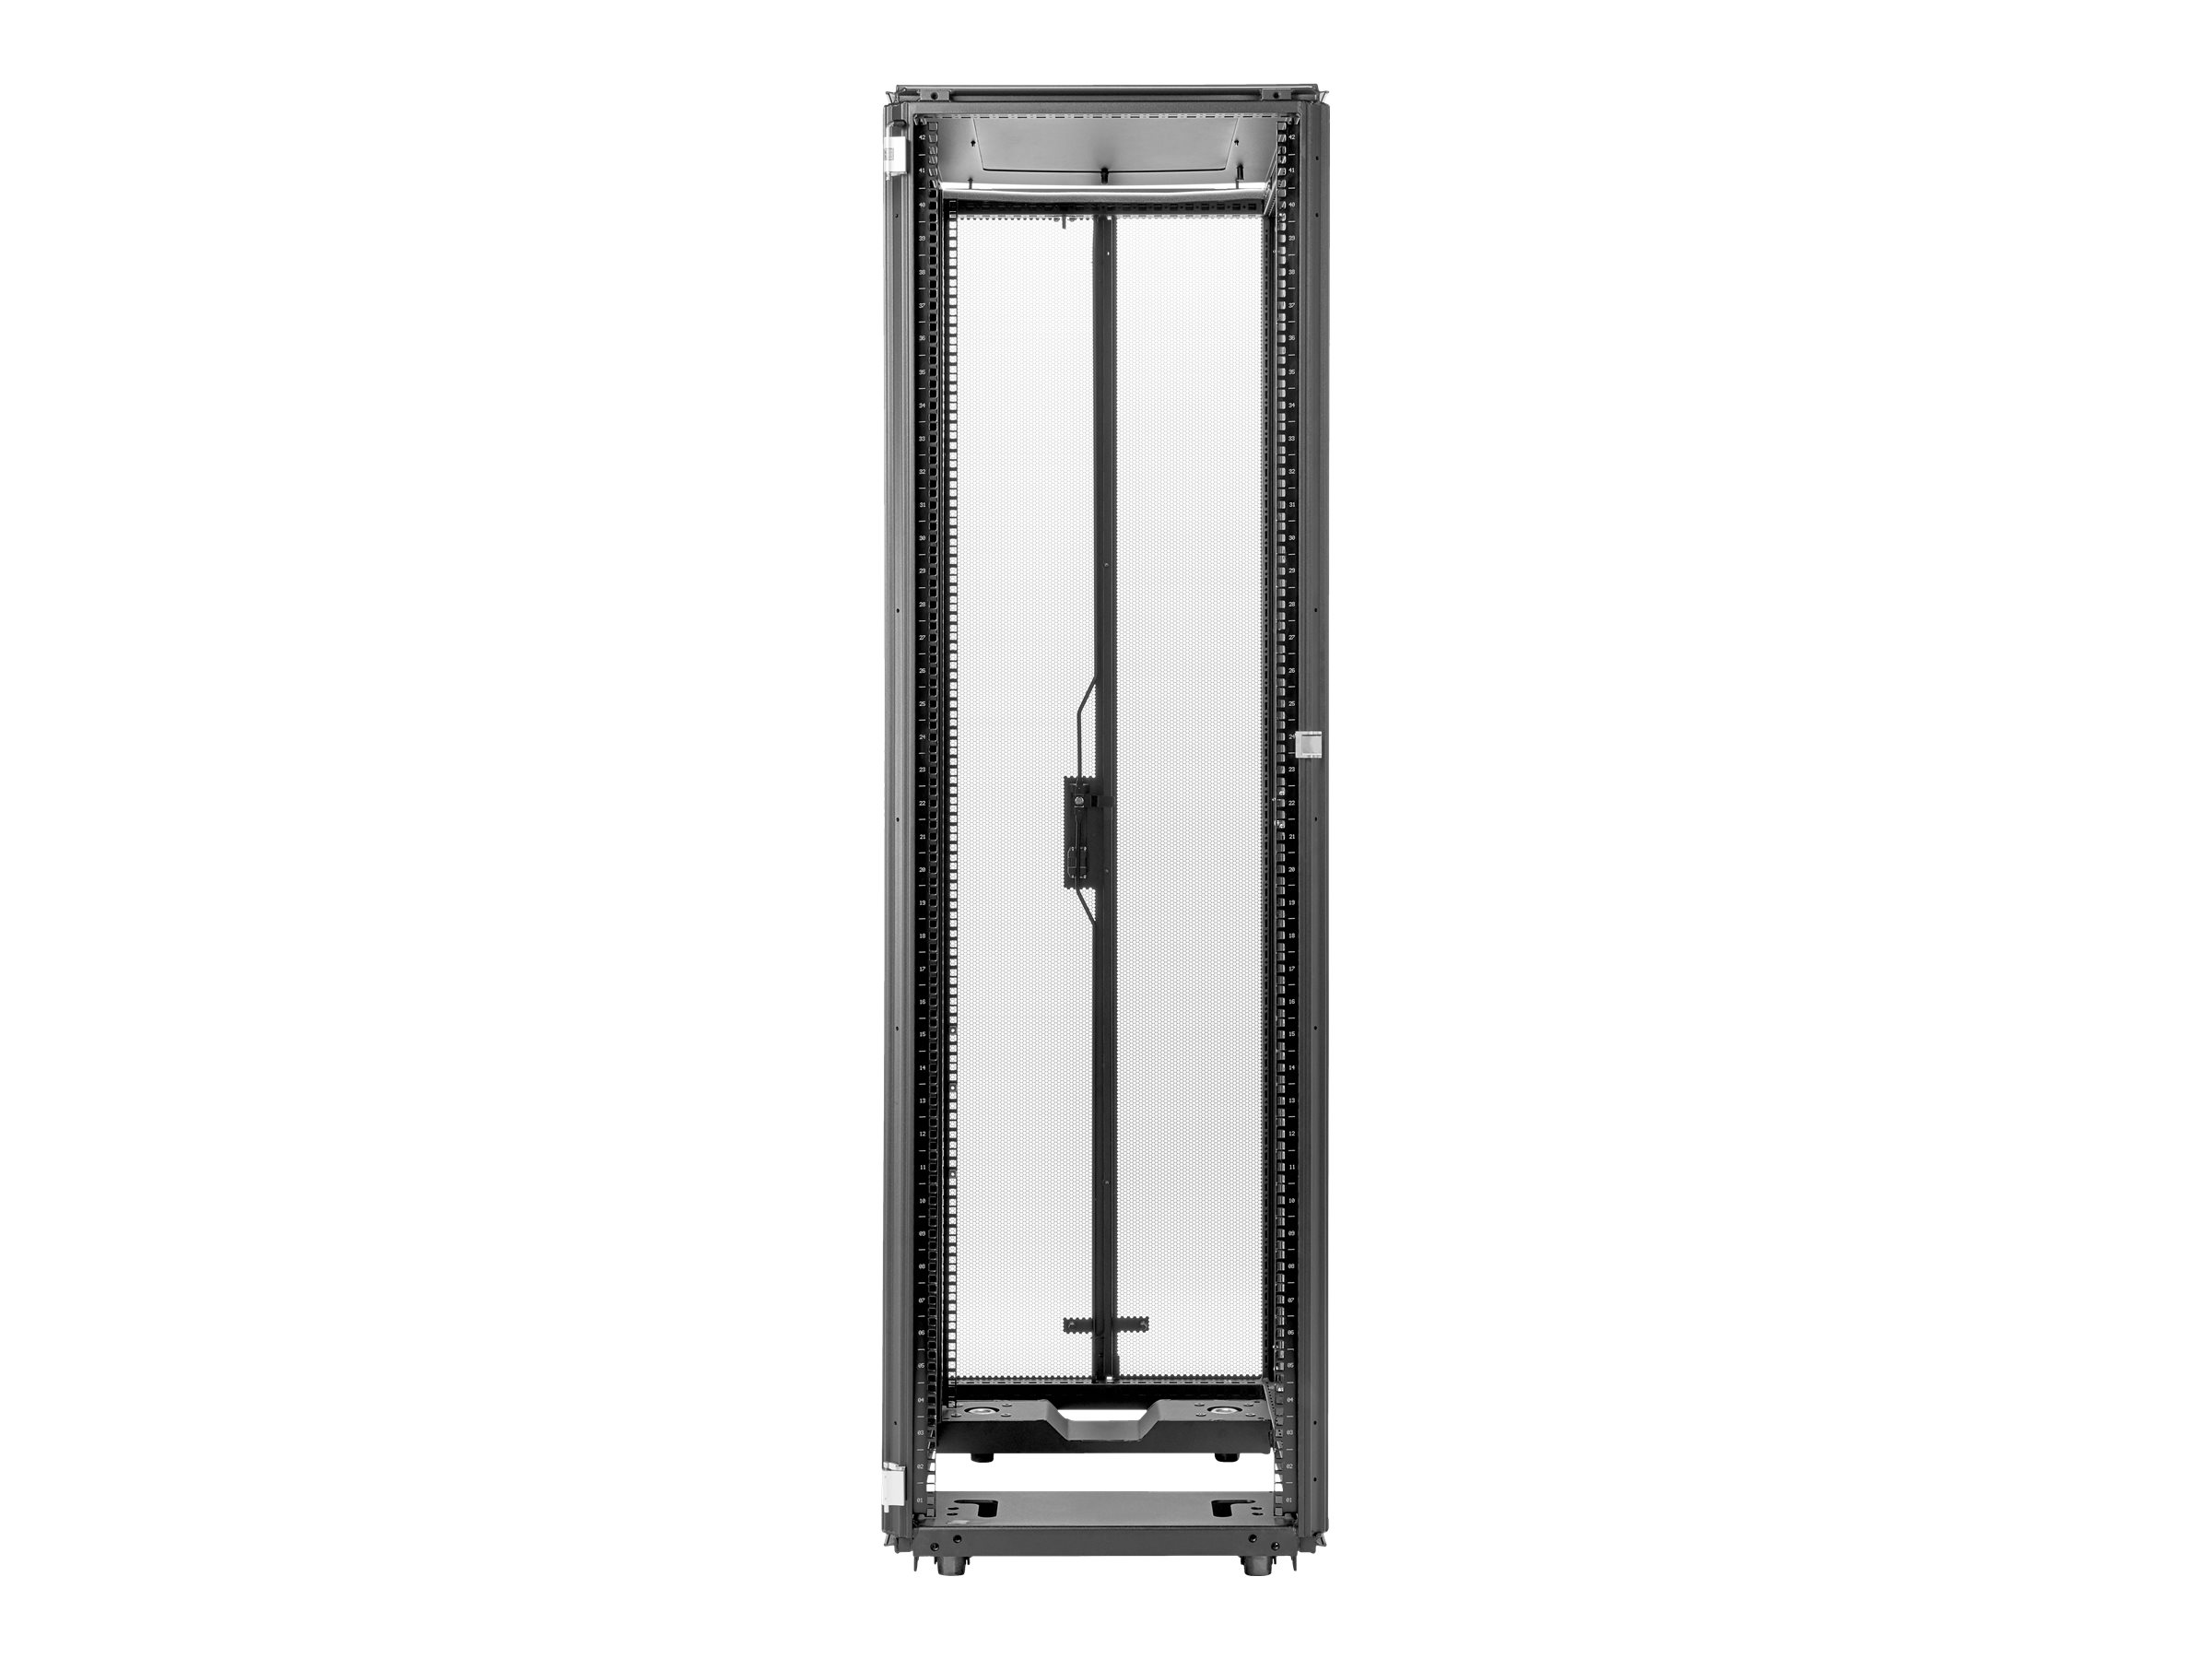 HPE Rack 42U, 600x1075mm G2 Kitted Advanced Pallet Rack with Side Panels and Baying